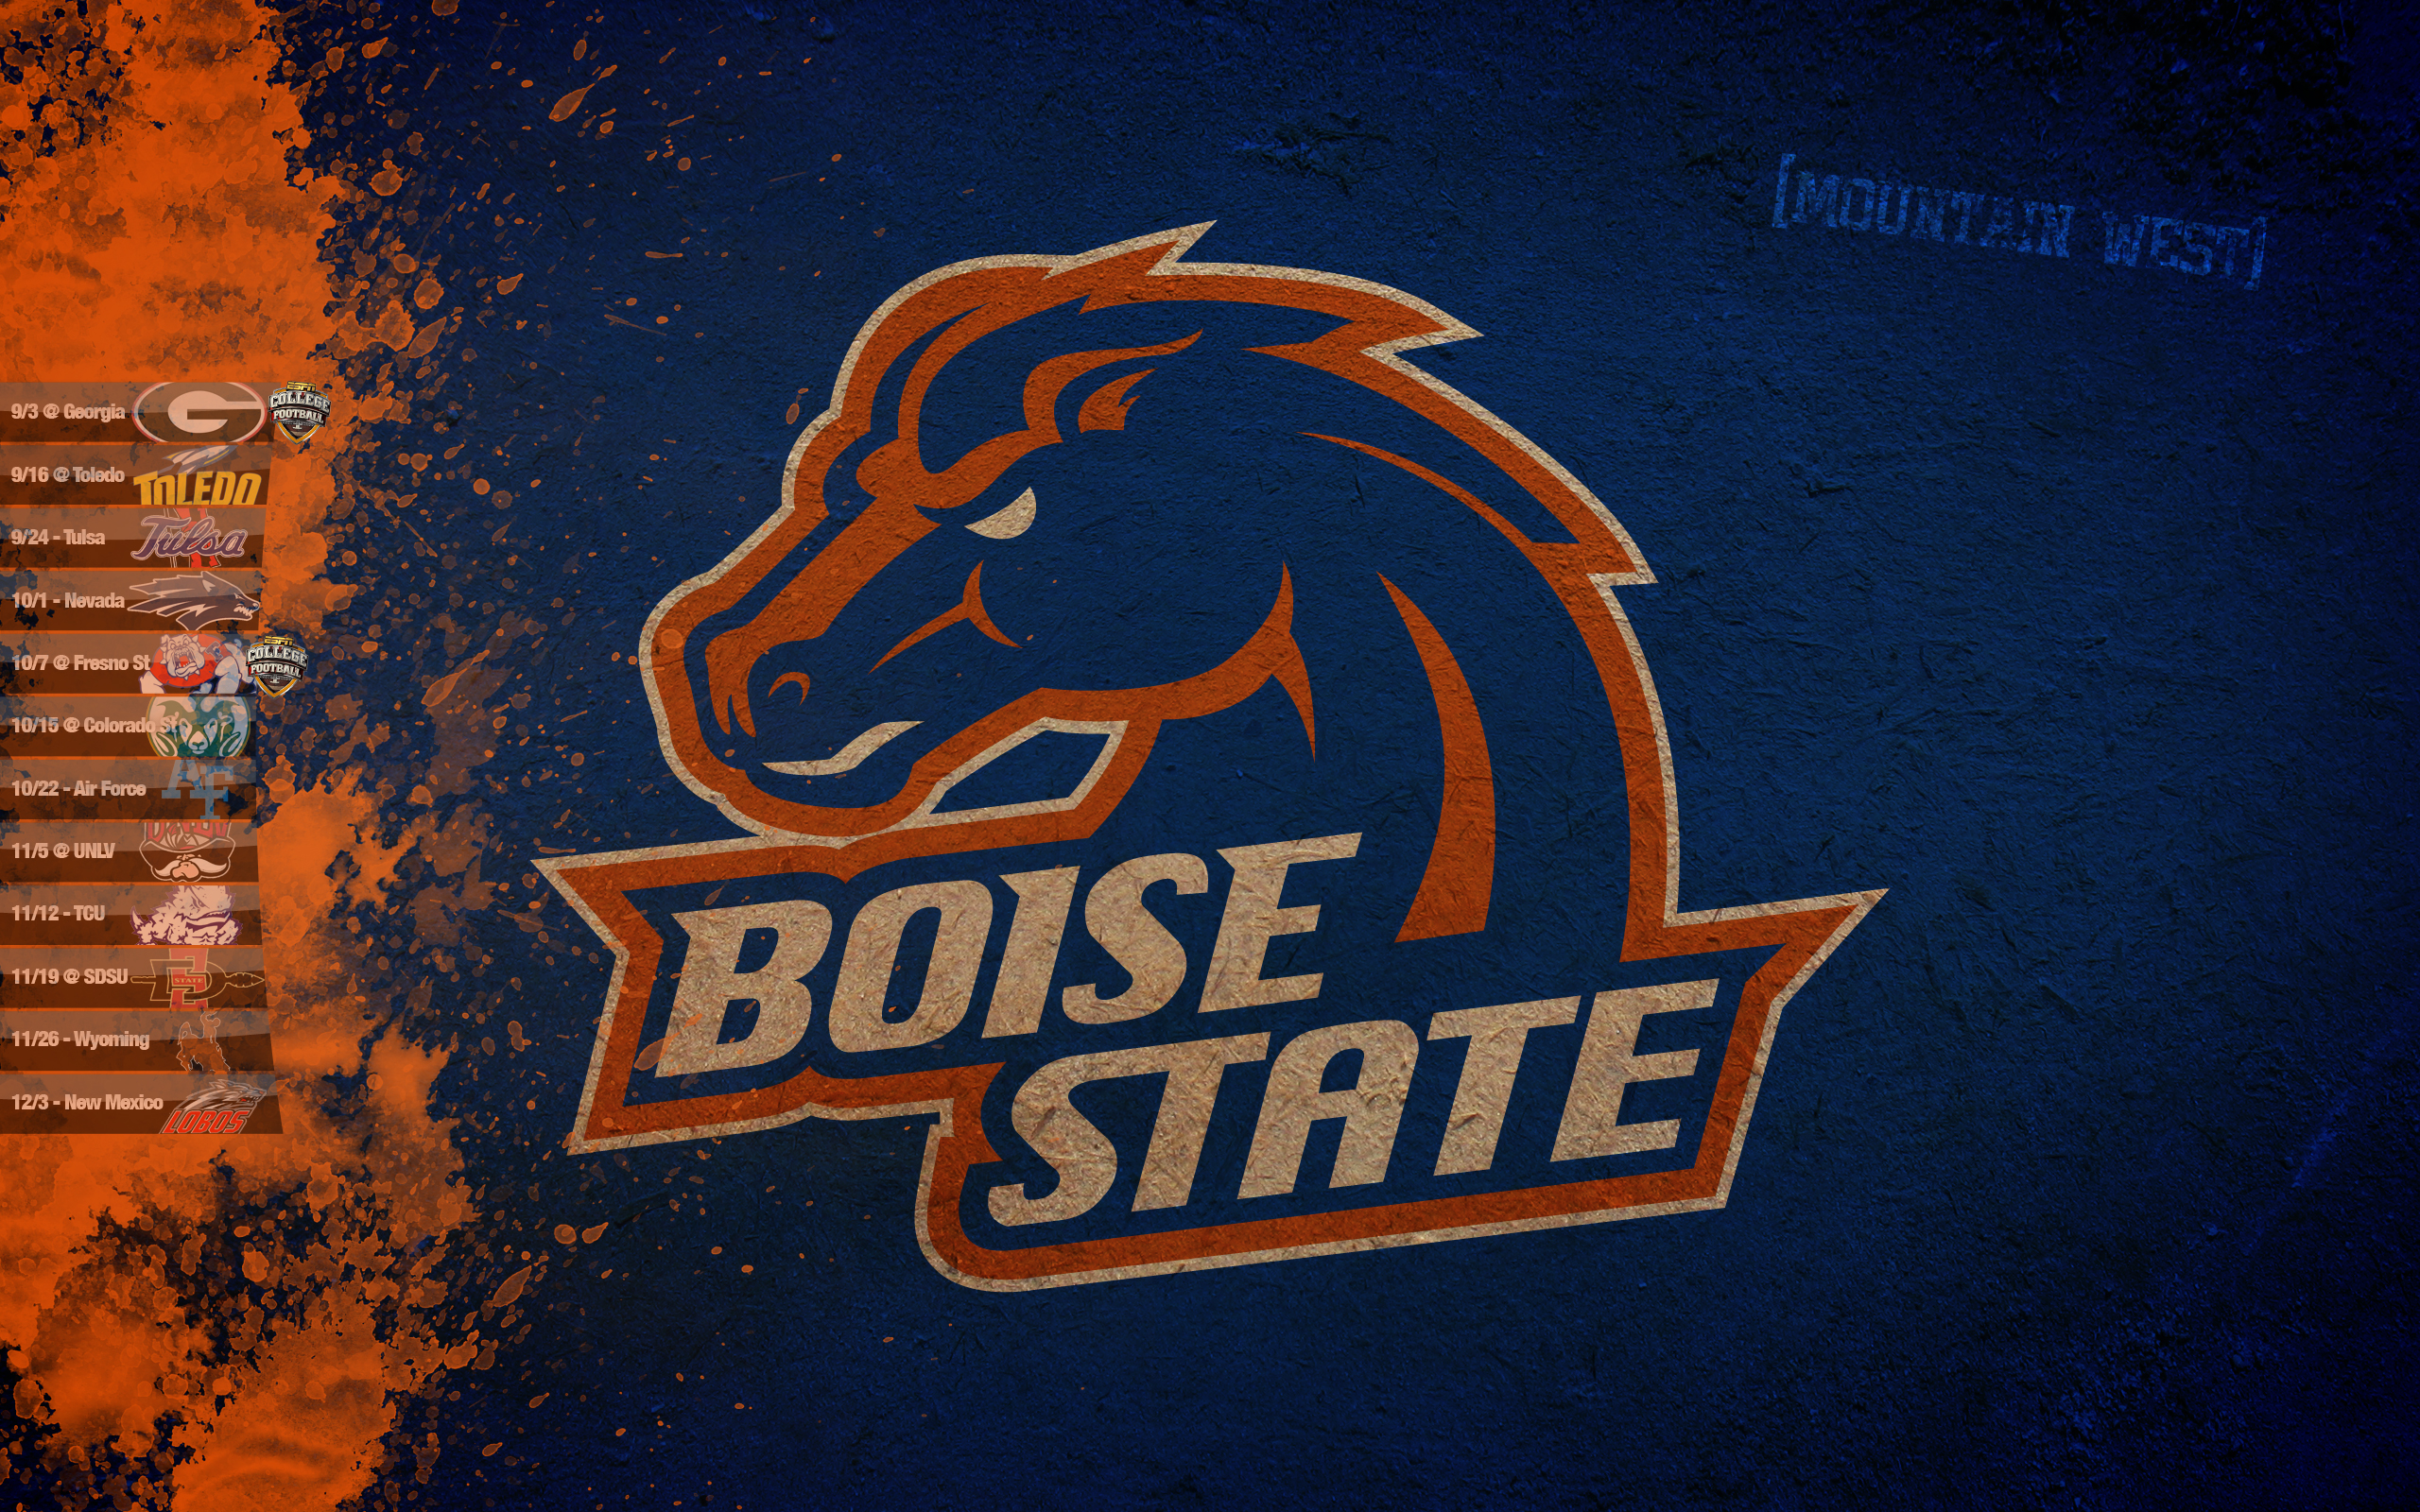 Cbs college network coaching staffbuy boise state mountaineers news